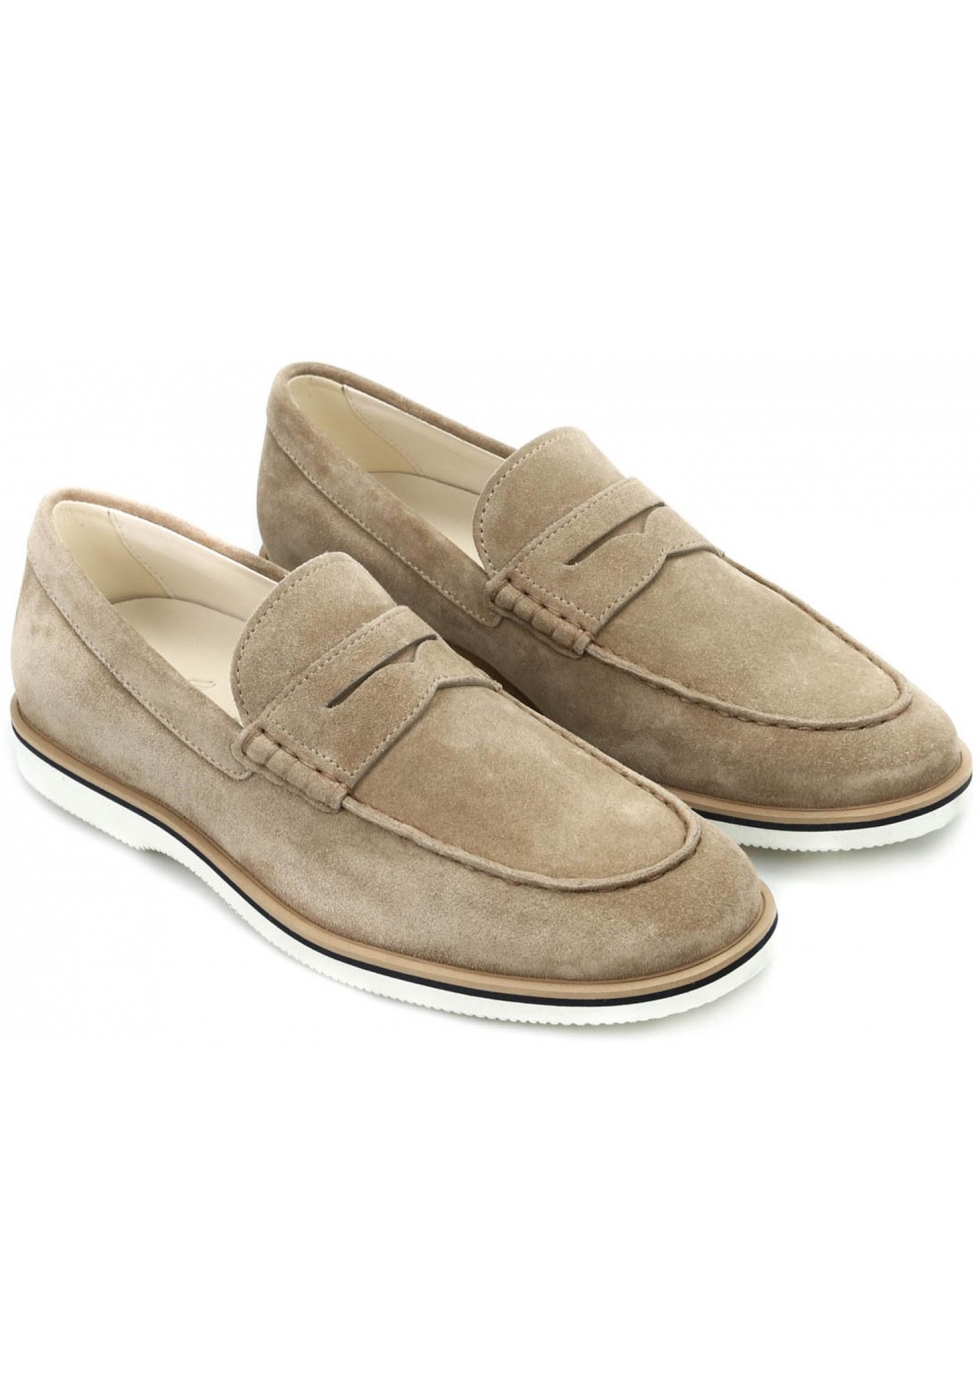 Hogan Club H262 penny loafers in beige suede leather - Italian Boutique